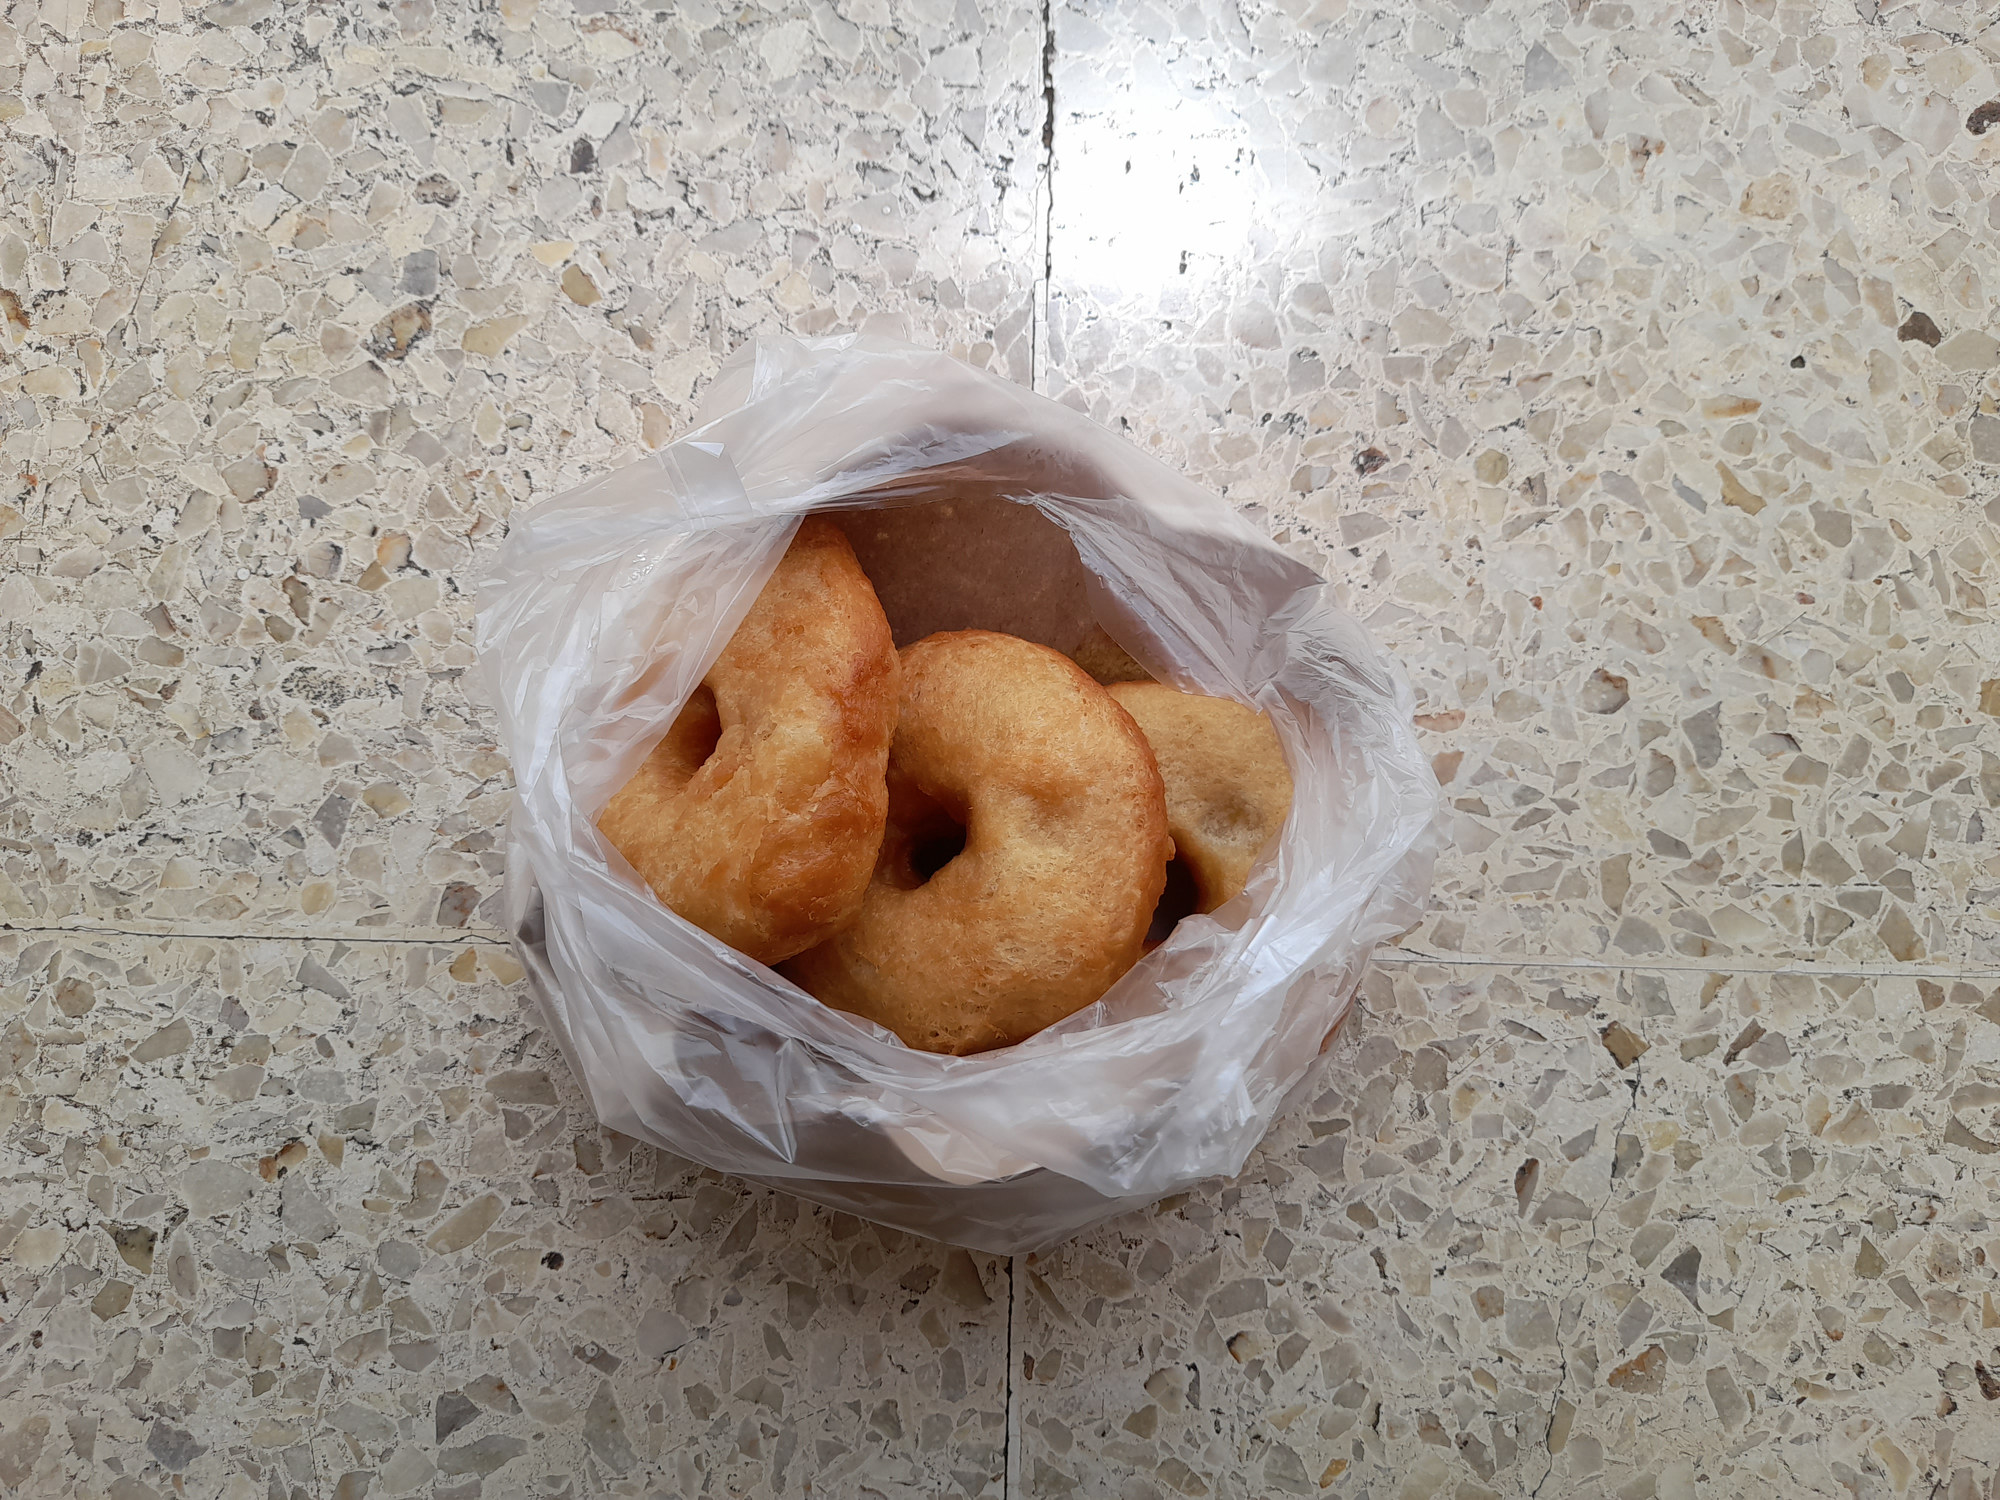 A bag of donuts